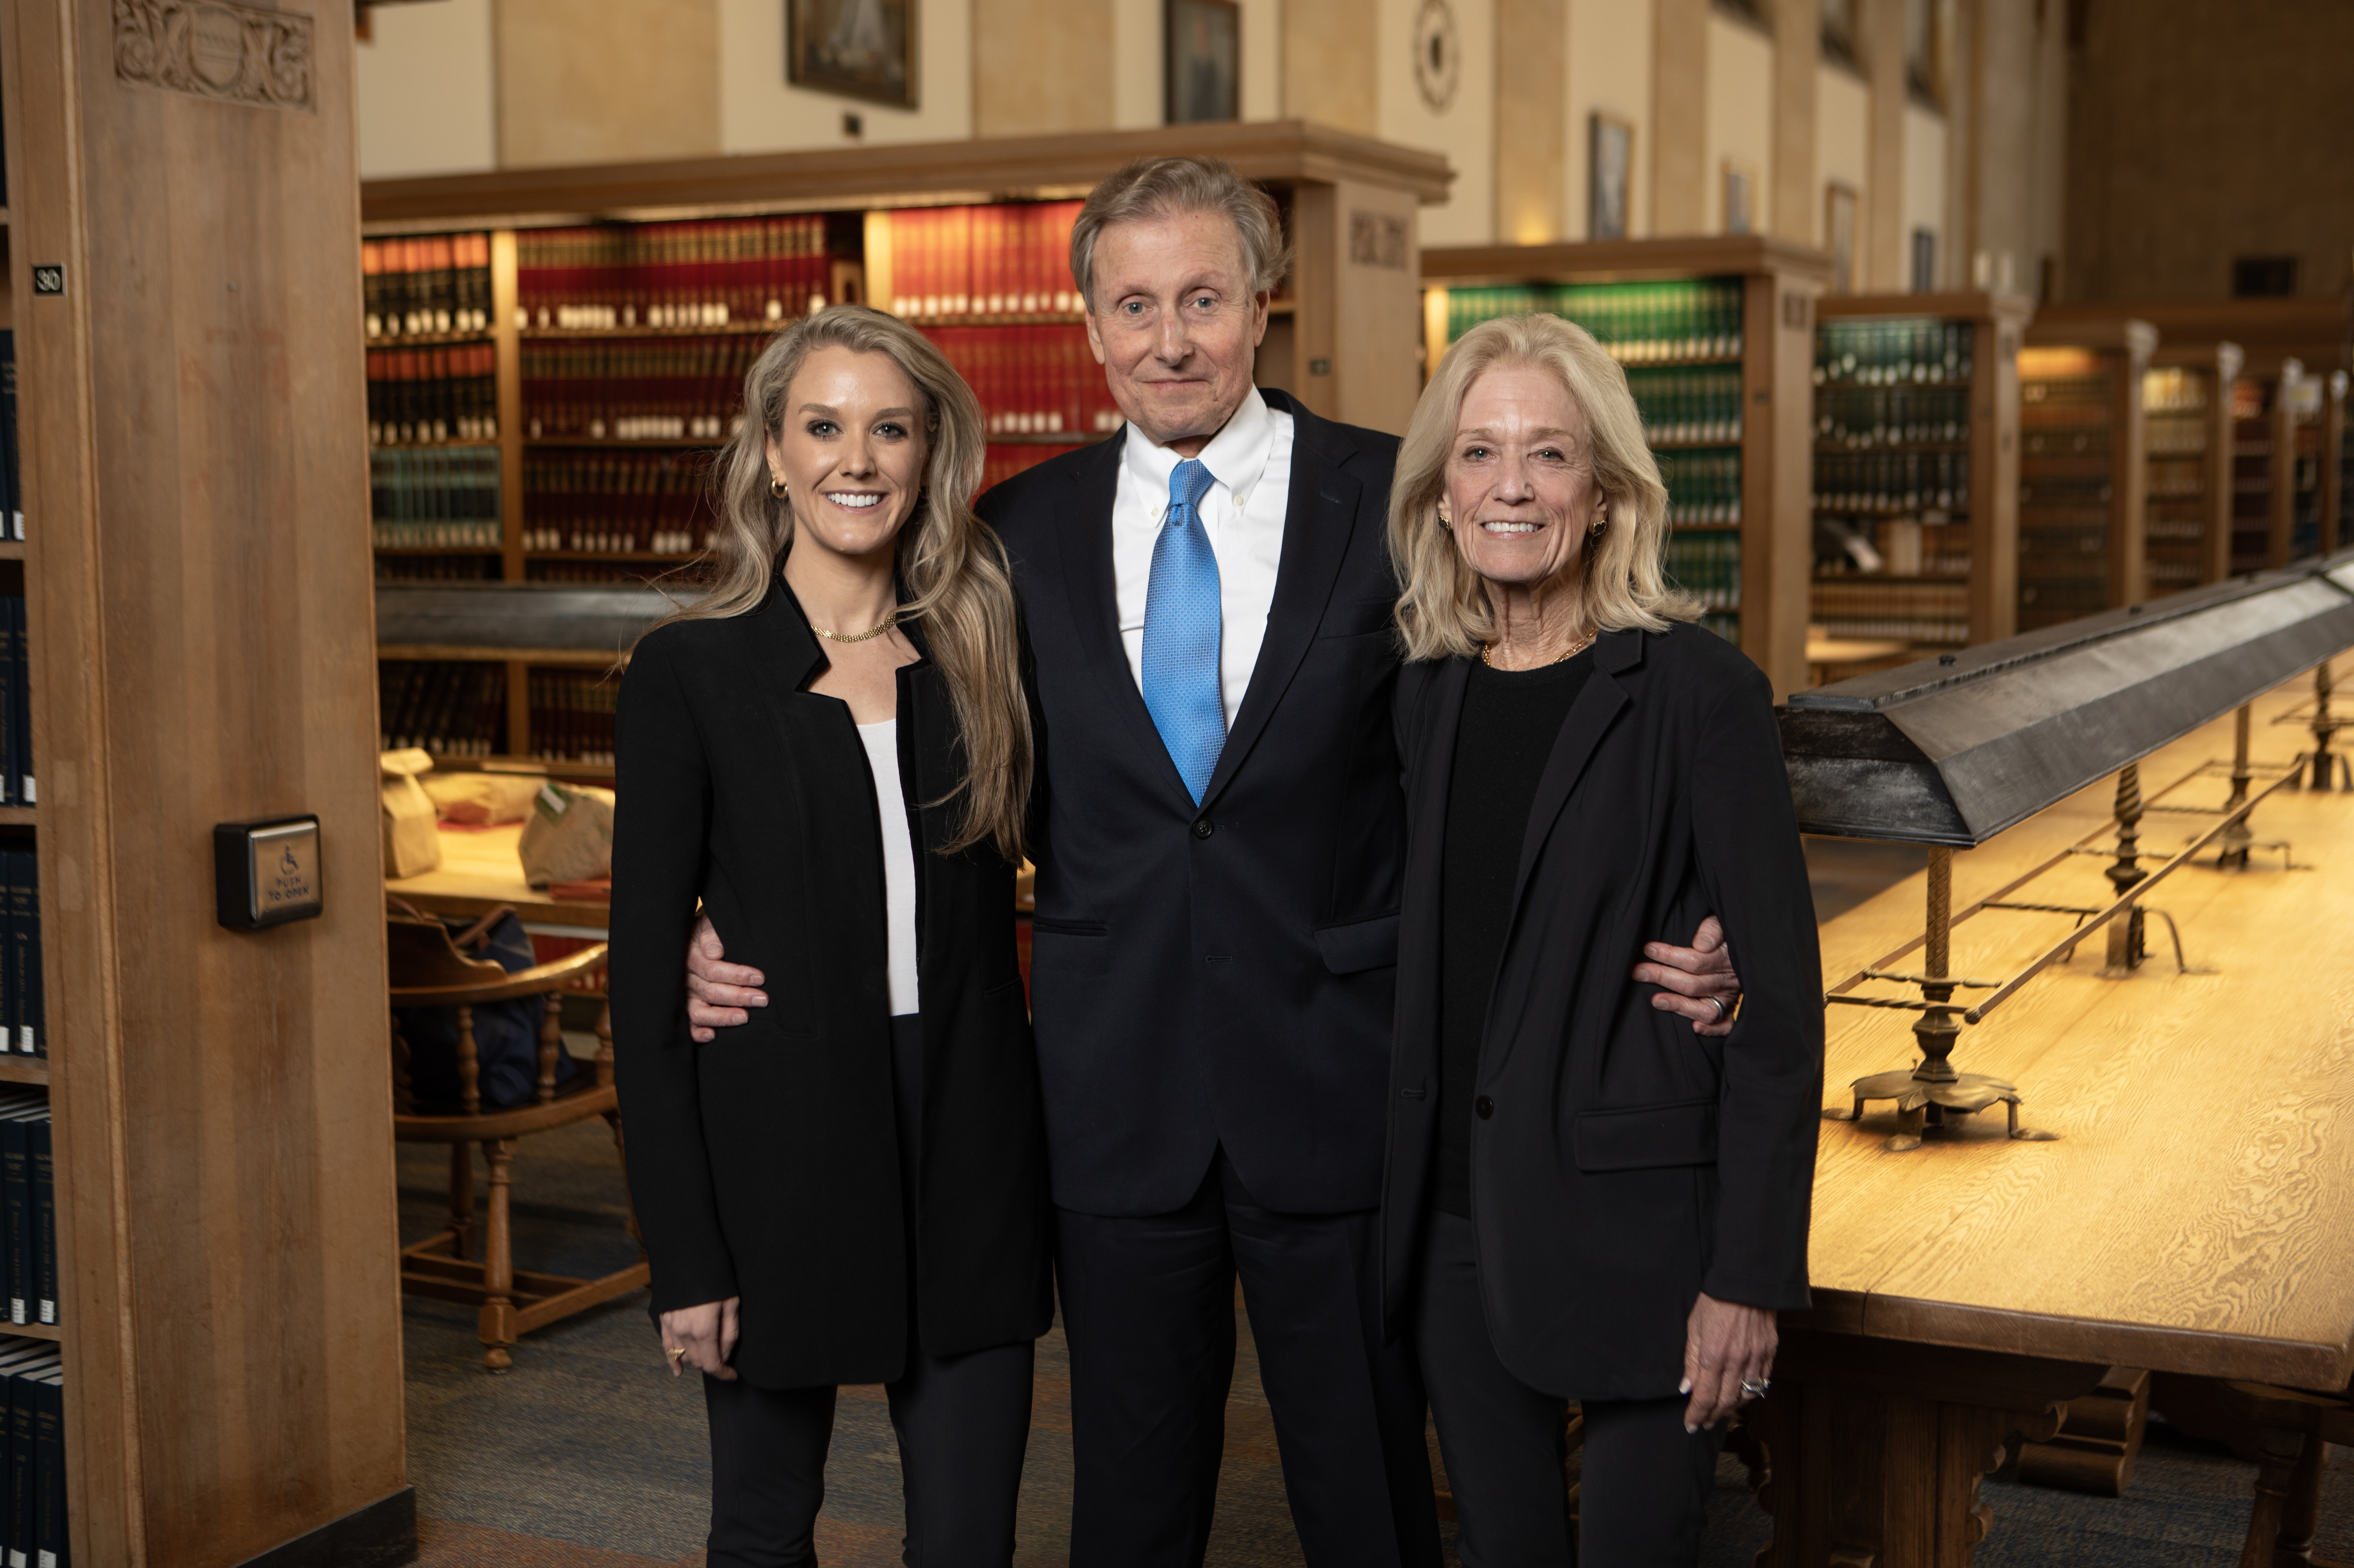 From left to right- F. Stephanie Barnhart ’20, F. Gregory Barnhart ’76 and Susan L. Gordon ’76